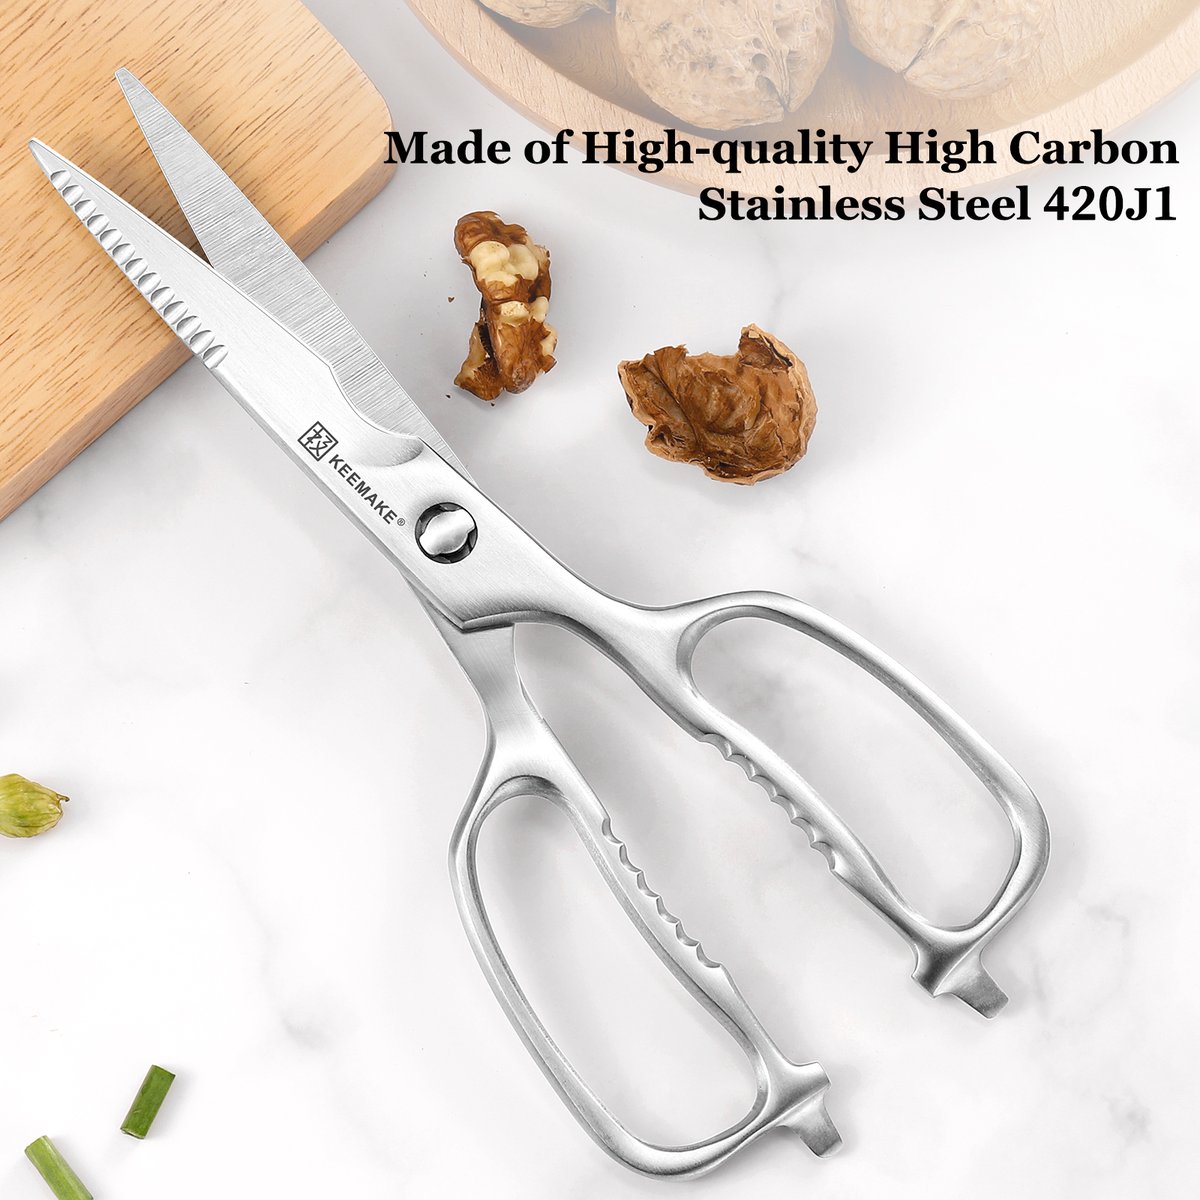 Versatility at its best! The KEEMAKE Kitchen Scissors are designed for multi-functional use, from cutting meat and veggies to opening bottles and cracking nuts. A must-have tool in every kitchen! 🌟✂️ #MultiFunctional #KitchenEssentials #KEEMAKE